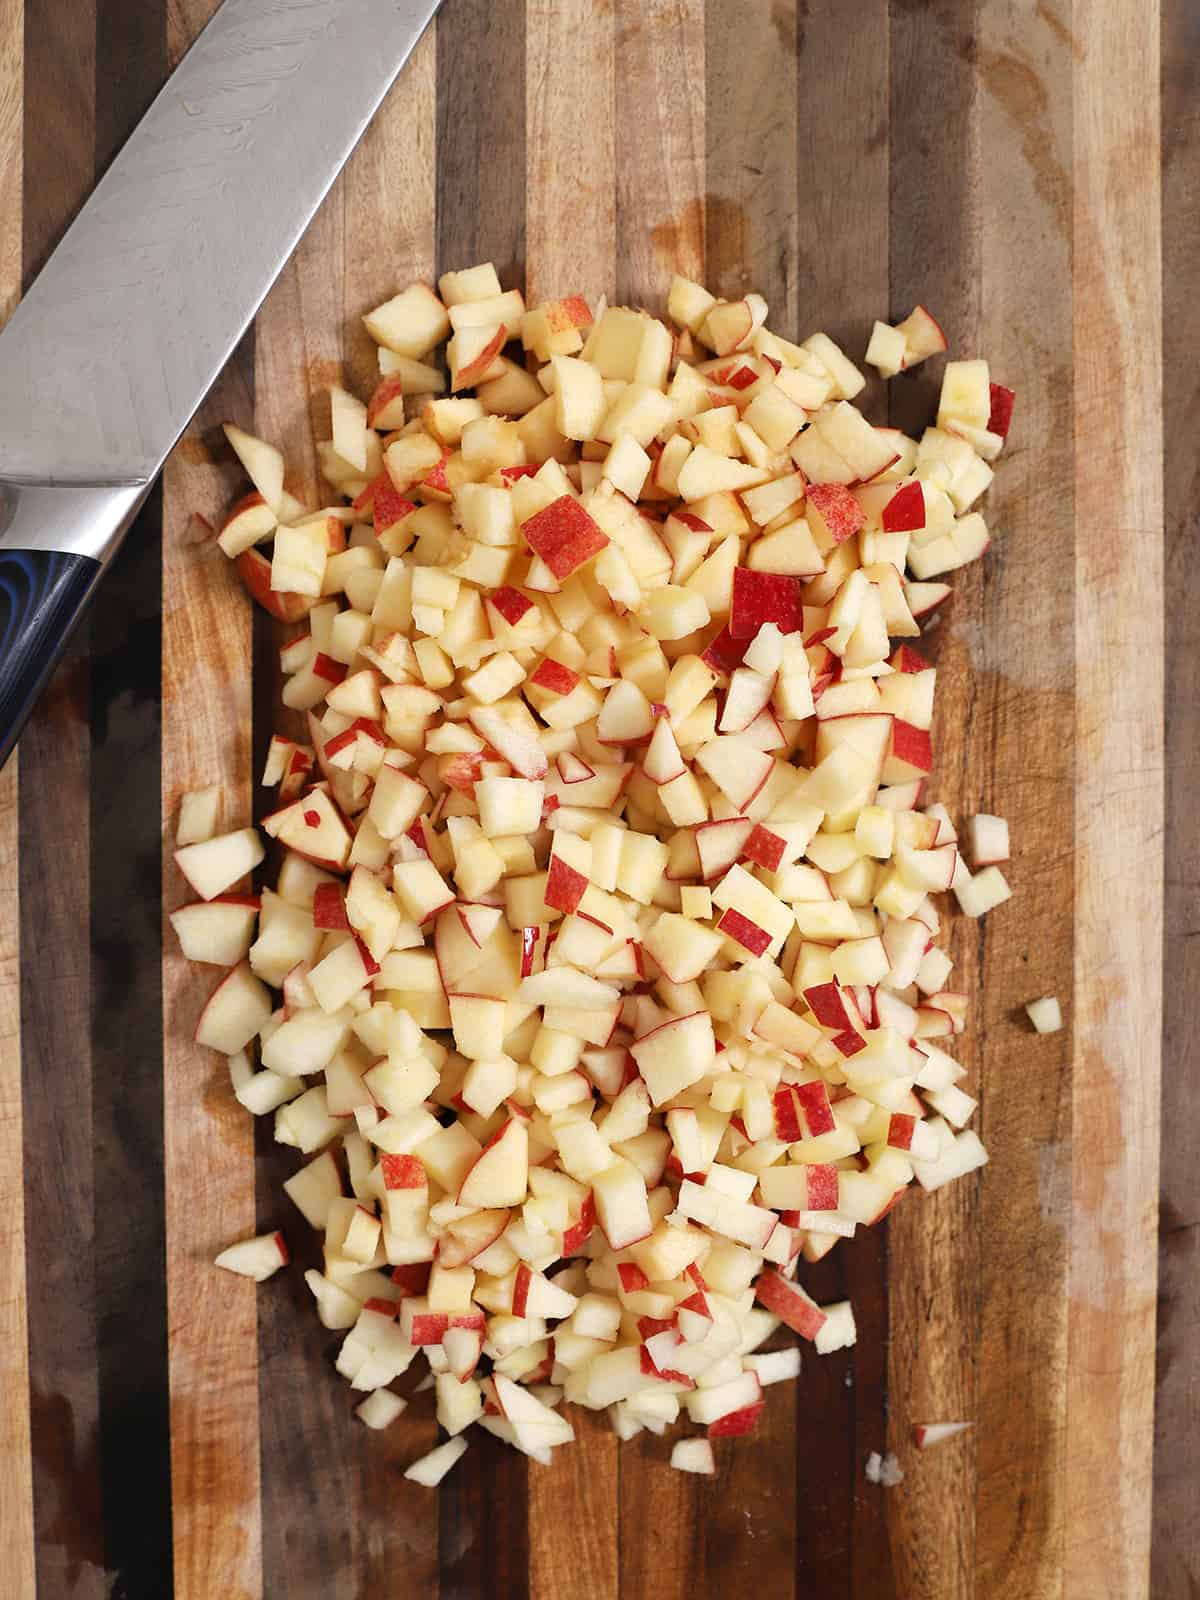 A wooden cutting board full of diced apples.